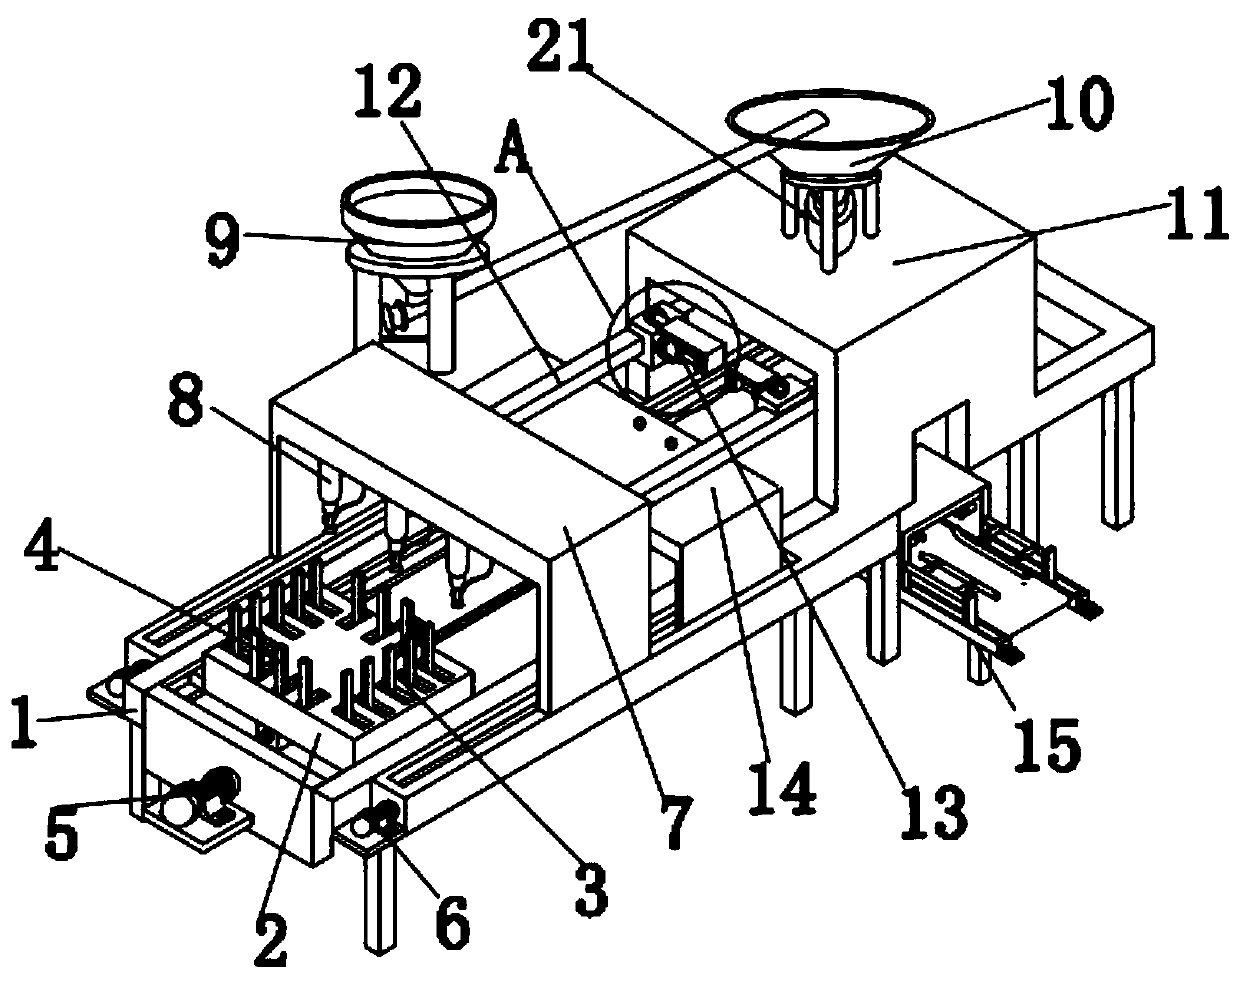 Full-automatic rice quantitative packaging device